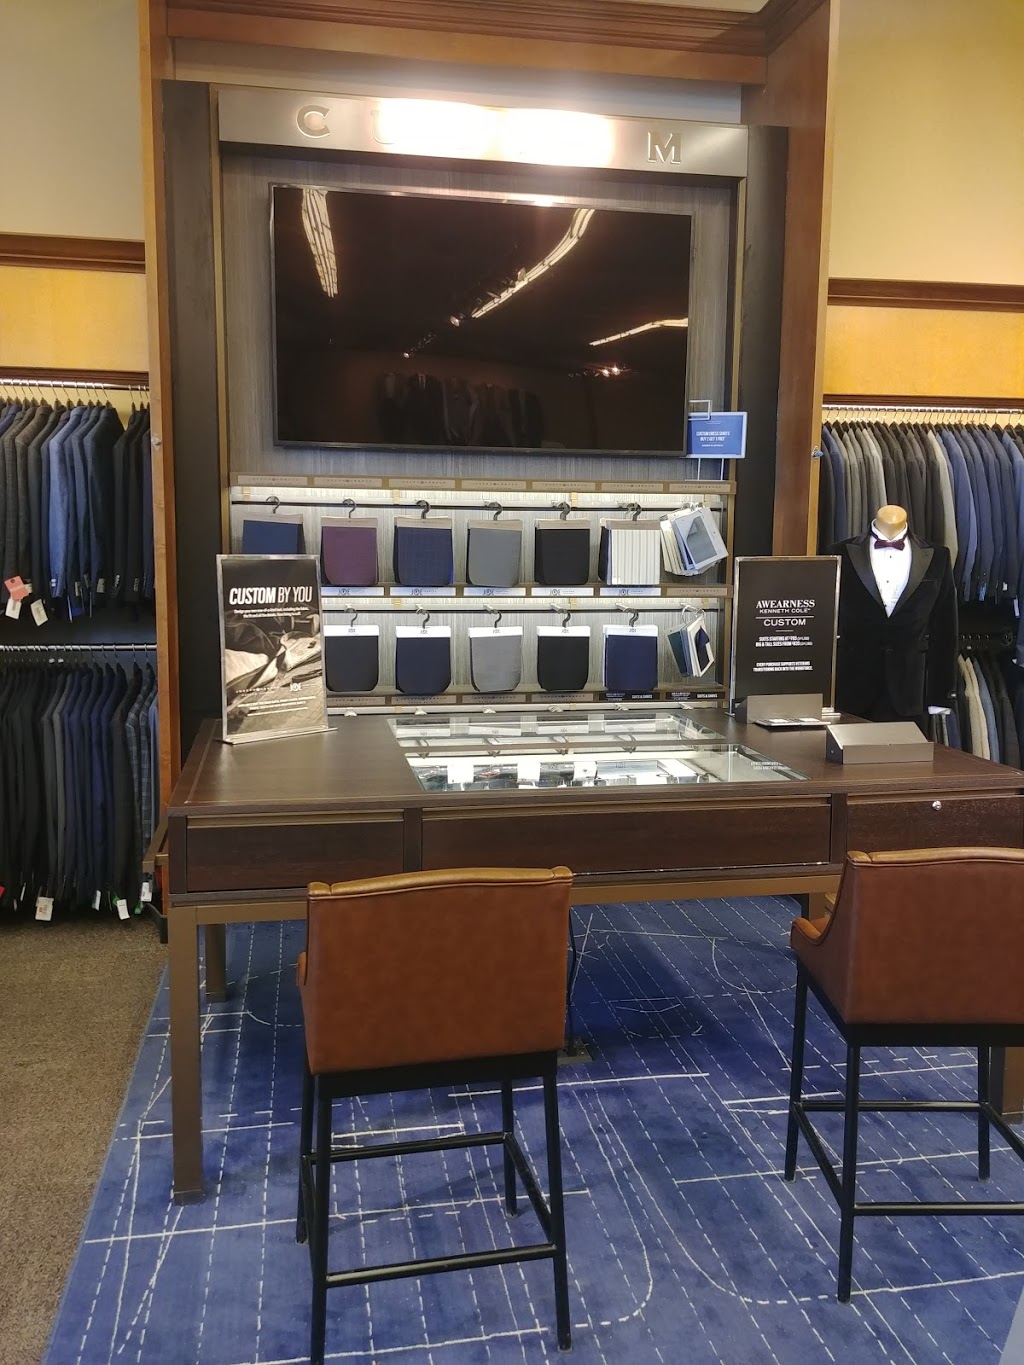 Moores Clothing for Men | 1899 Brock Rd, Pickering, ON L1V 4H7, Canada | Phone: (289) 372-3063